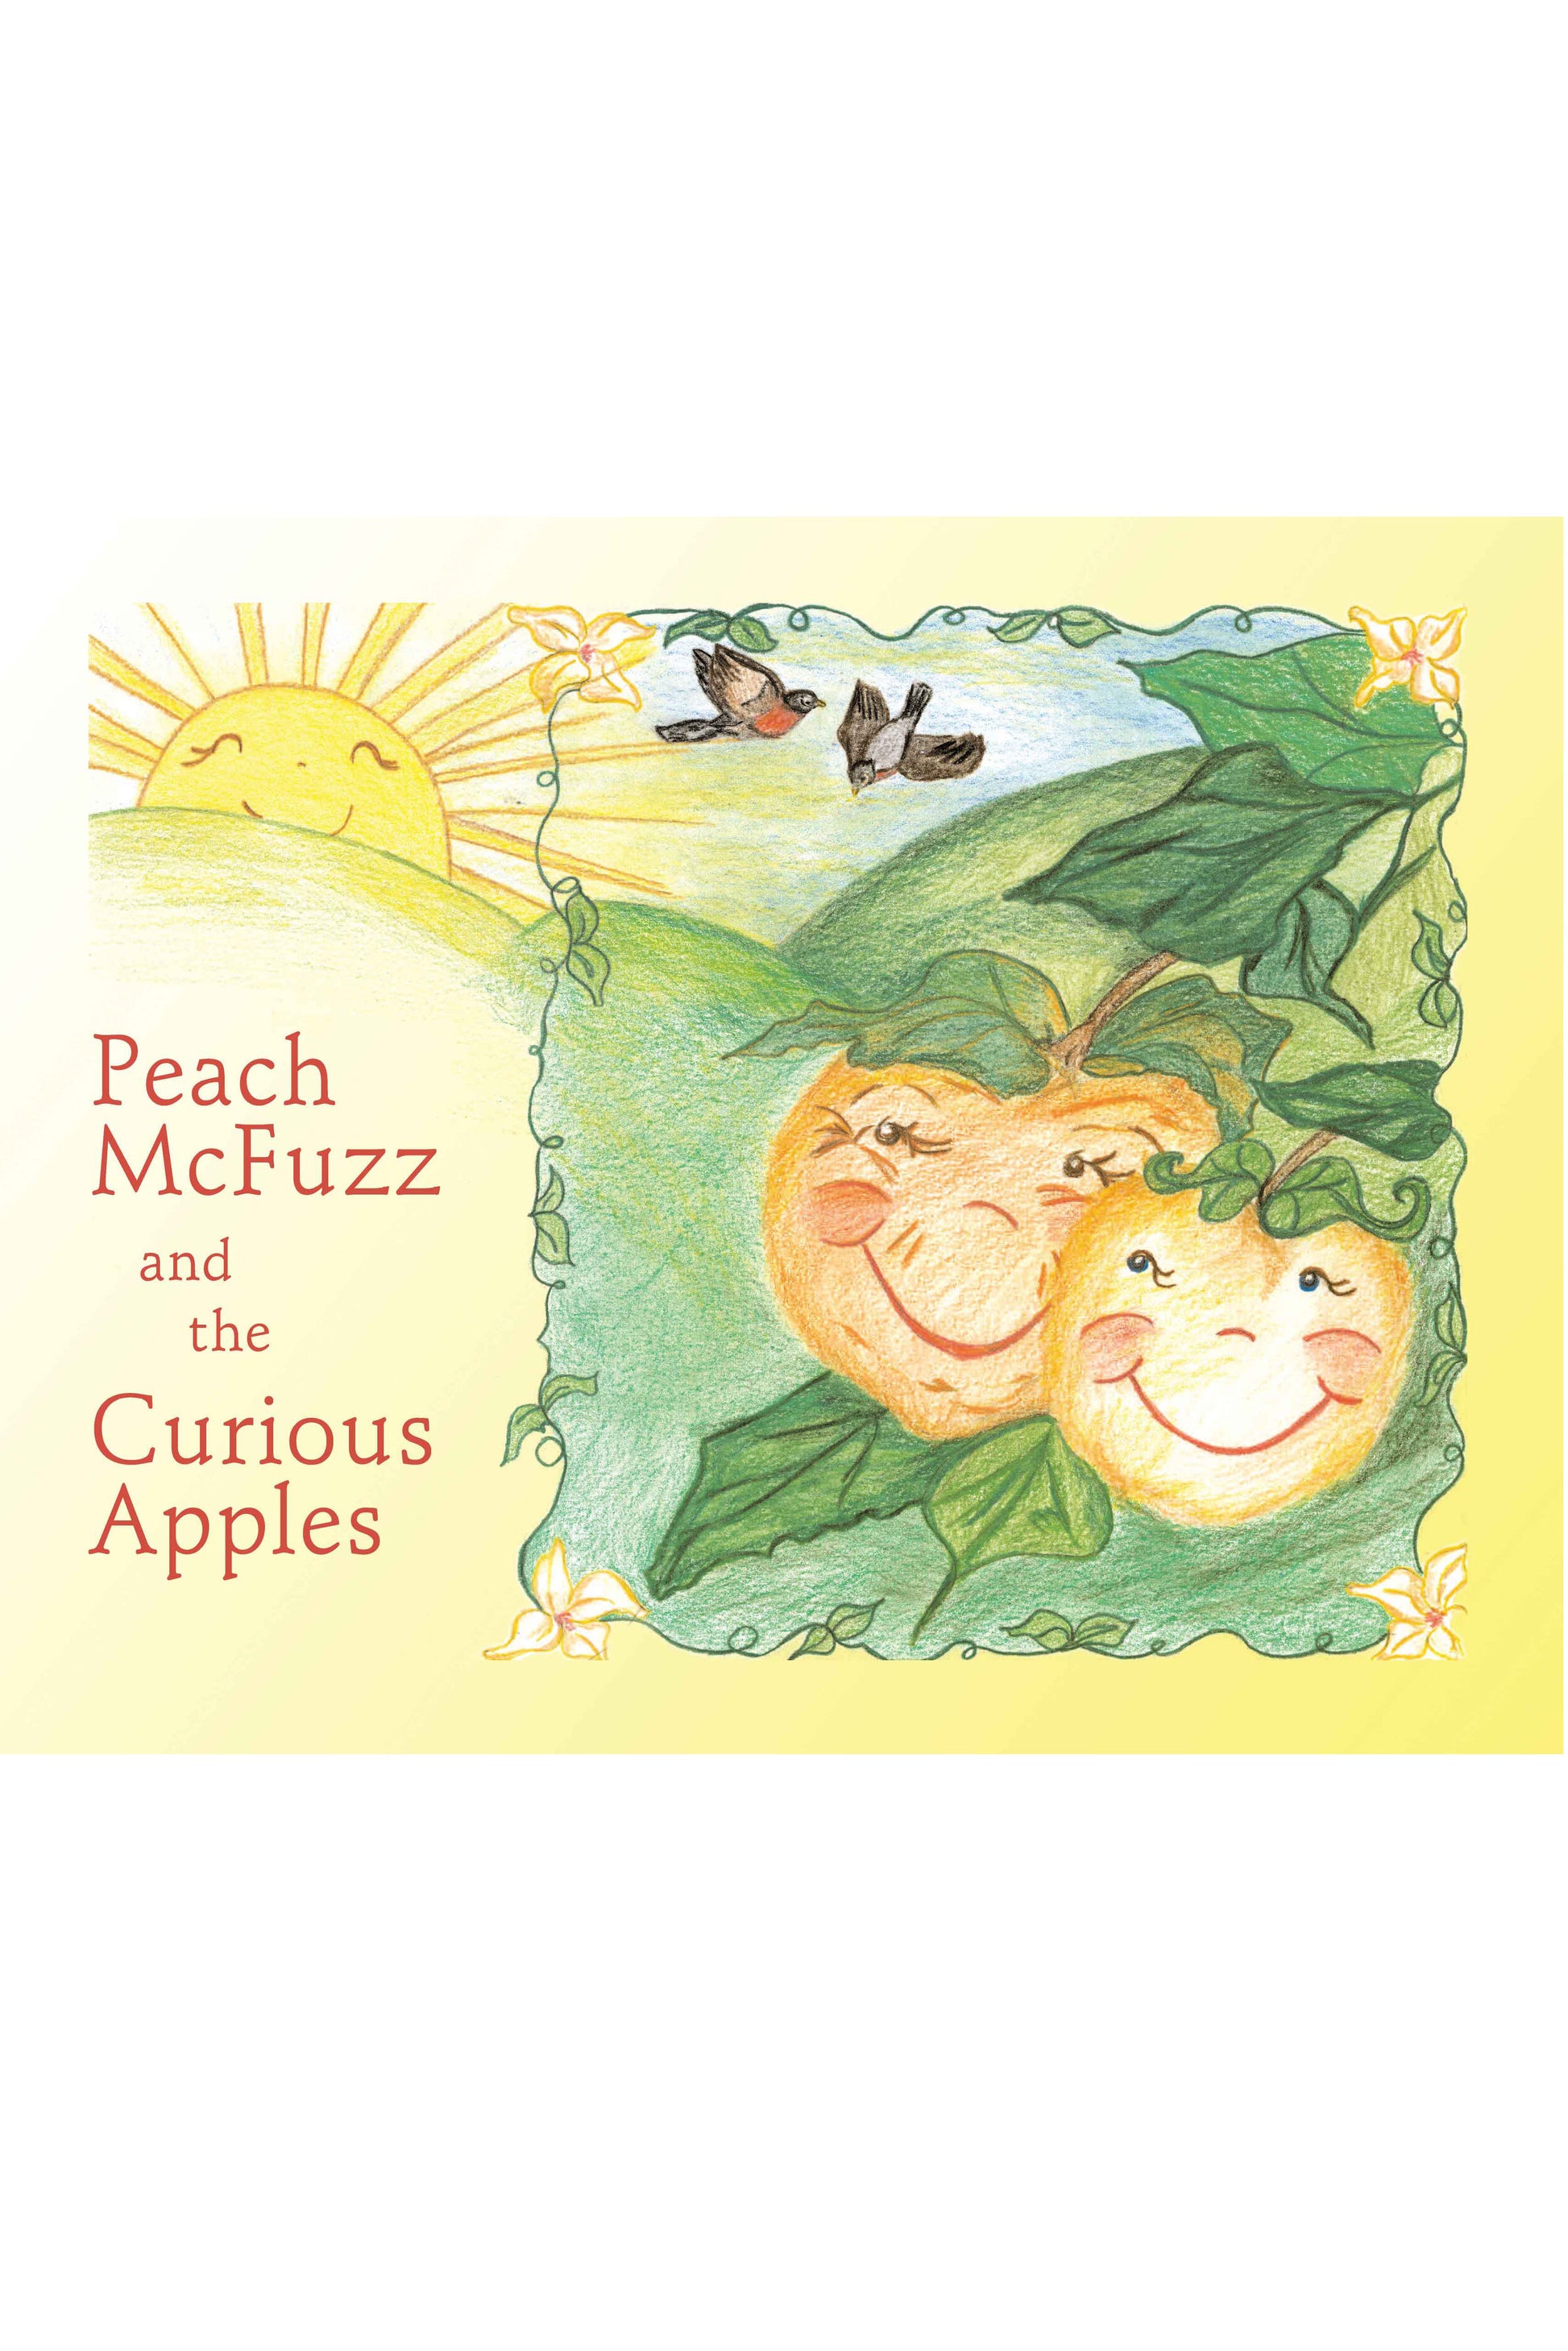 Peach McFuzz and the Curious Apples